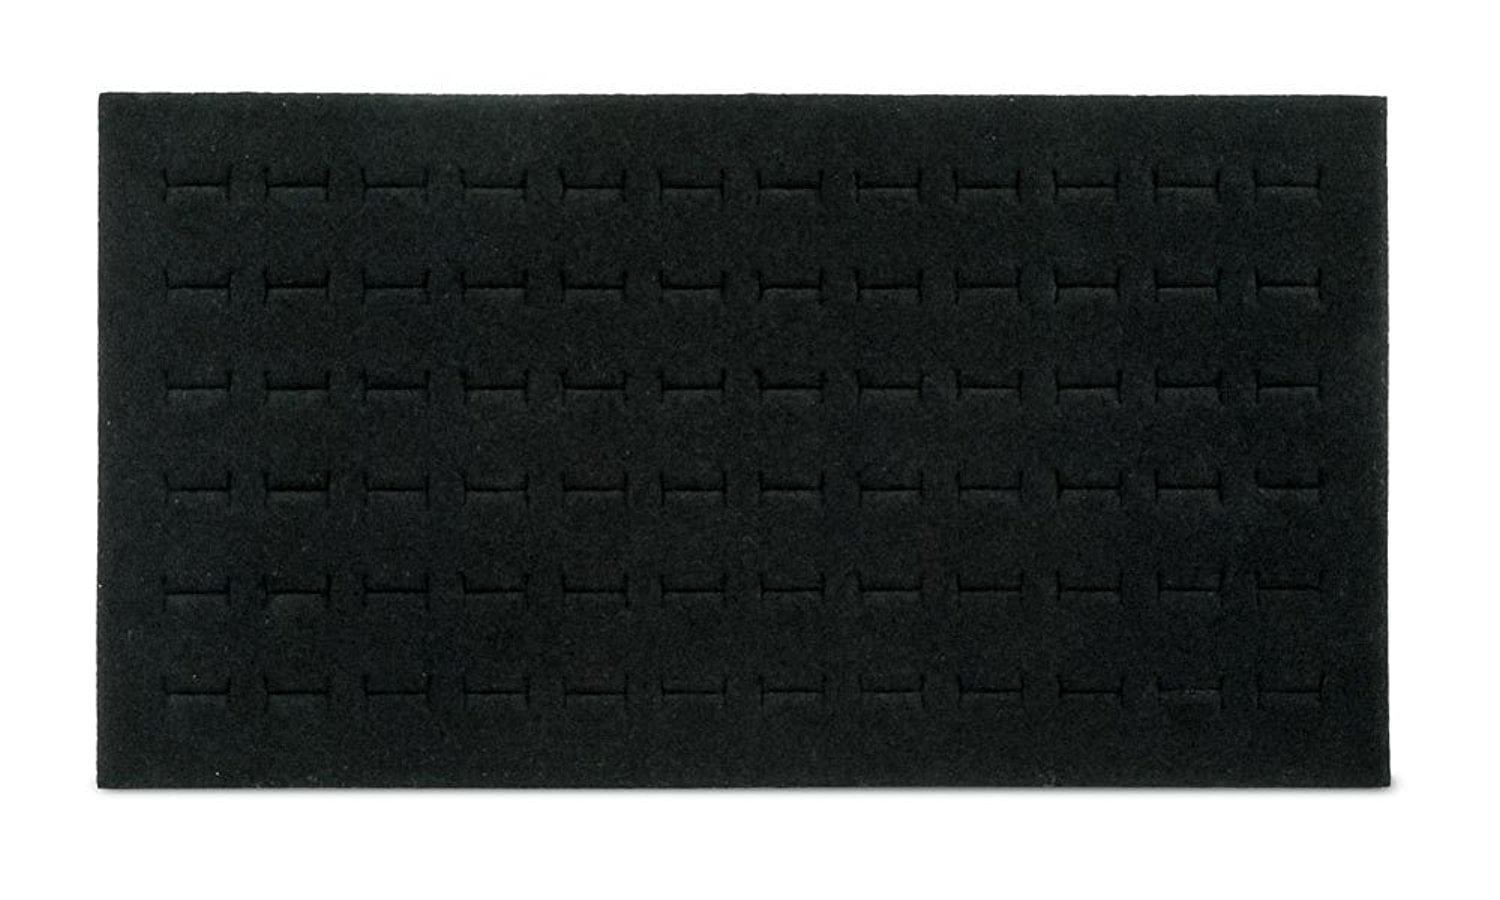 LARGE BLACK SLOTTED RING PAD IN TRAY BOX display plush felt cushion for jewelry 